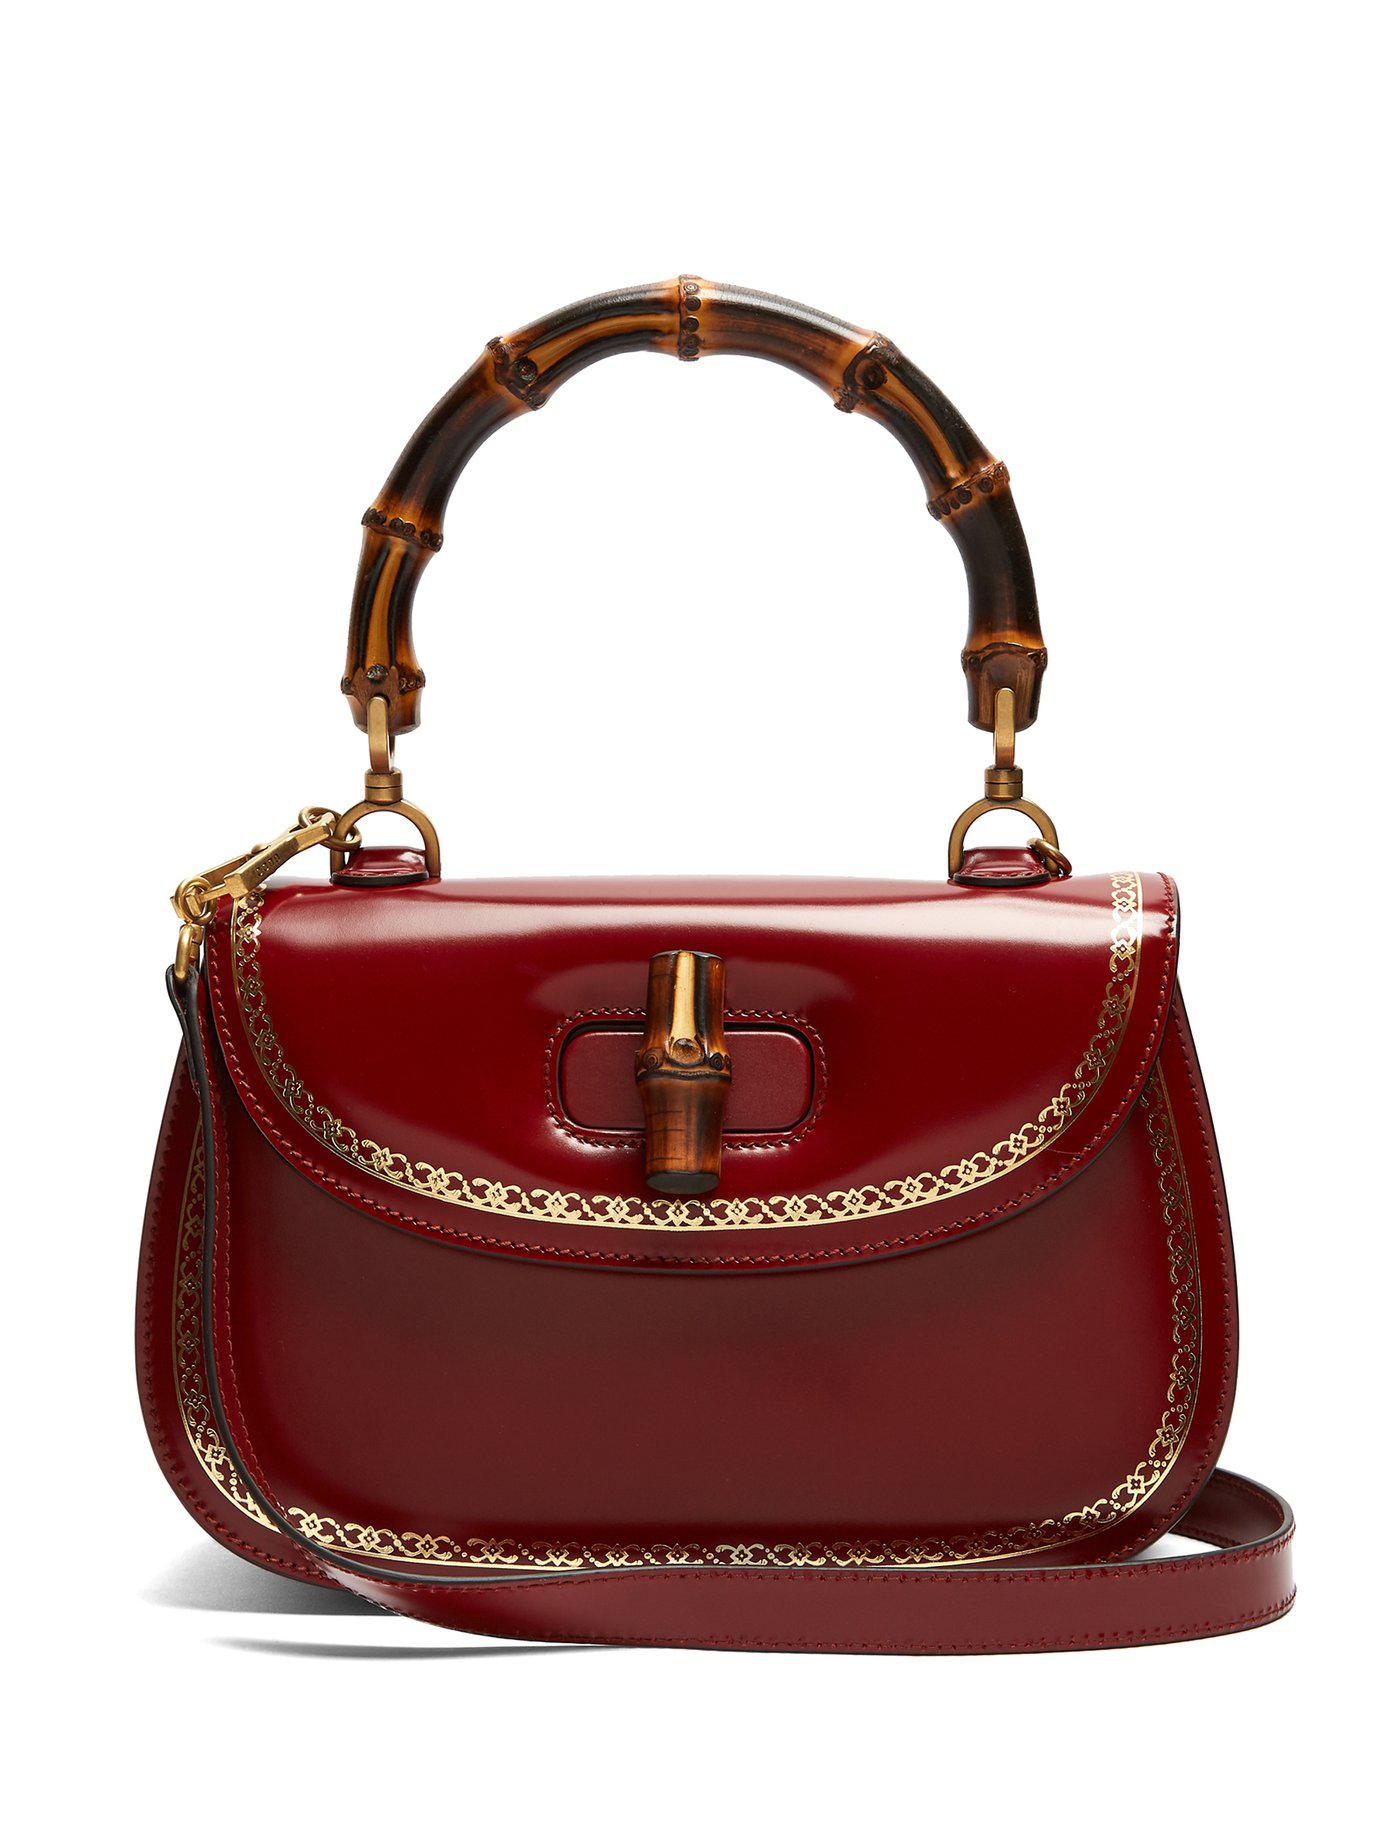 Gucci Bamboo-handle Leather Bag in Red - Lyst